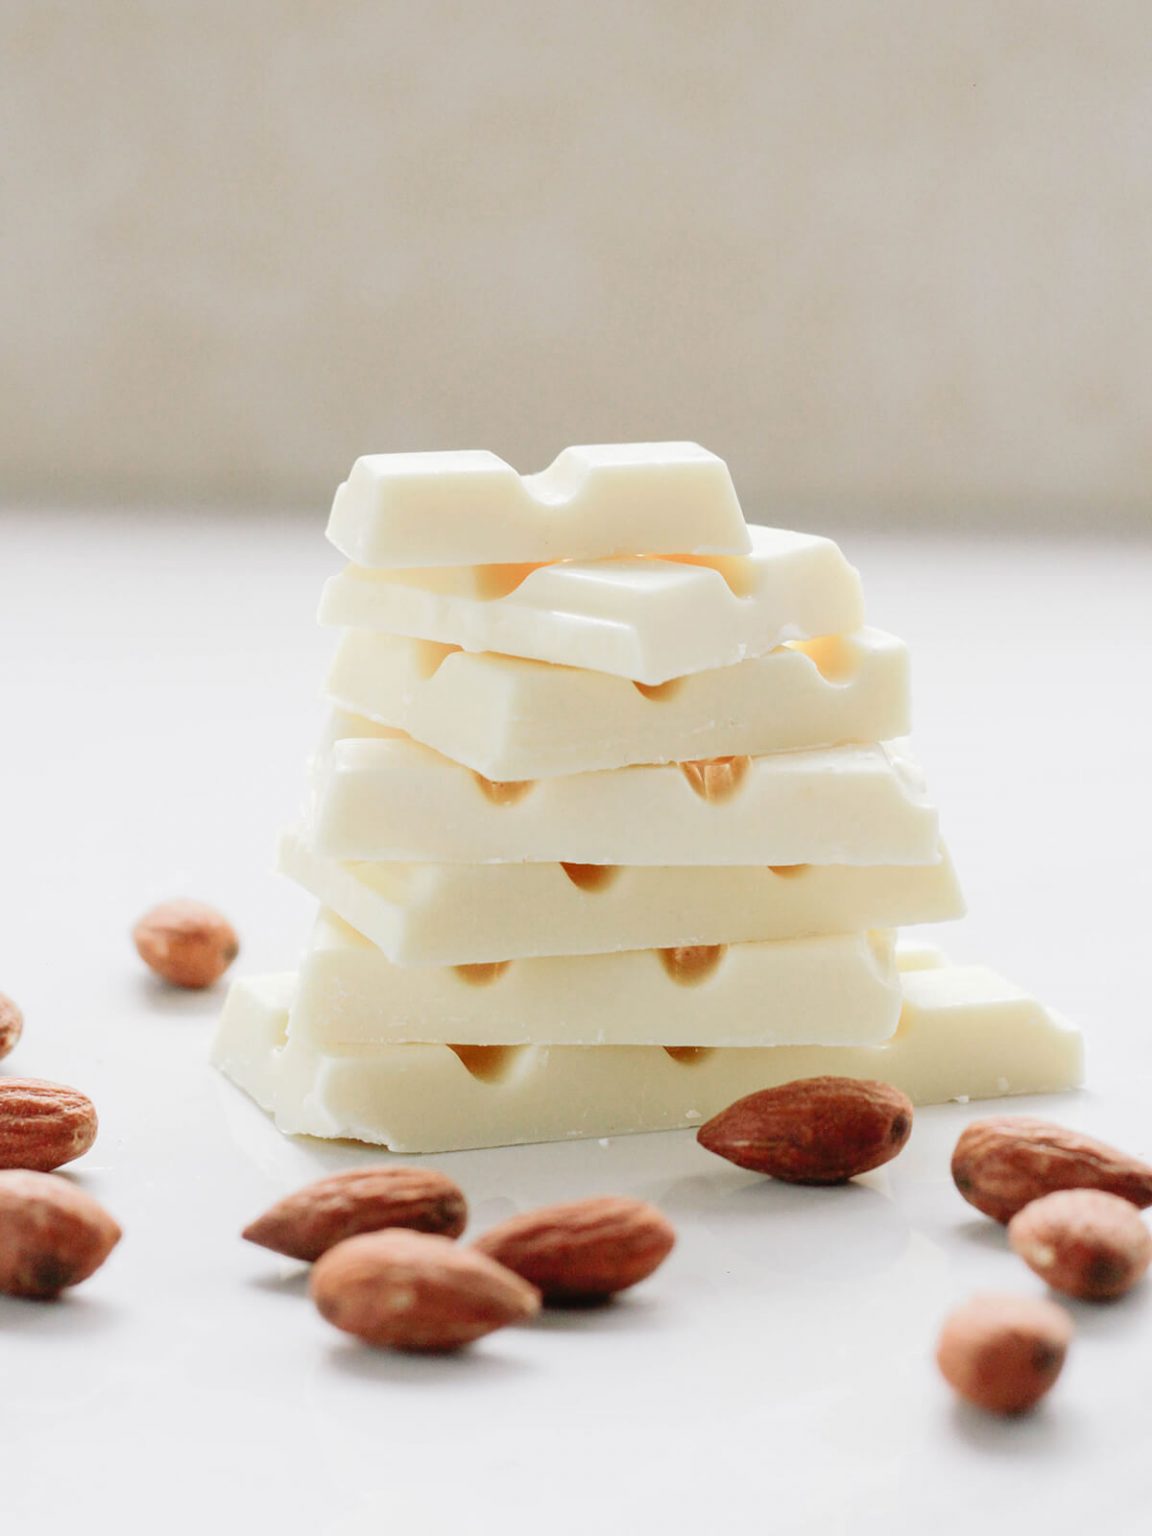 Loving White Chocolate indicates that you’re an adventurous person who is always up for something new.